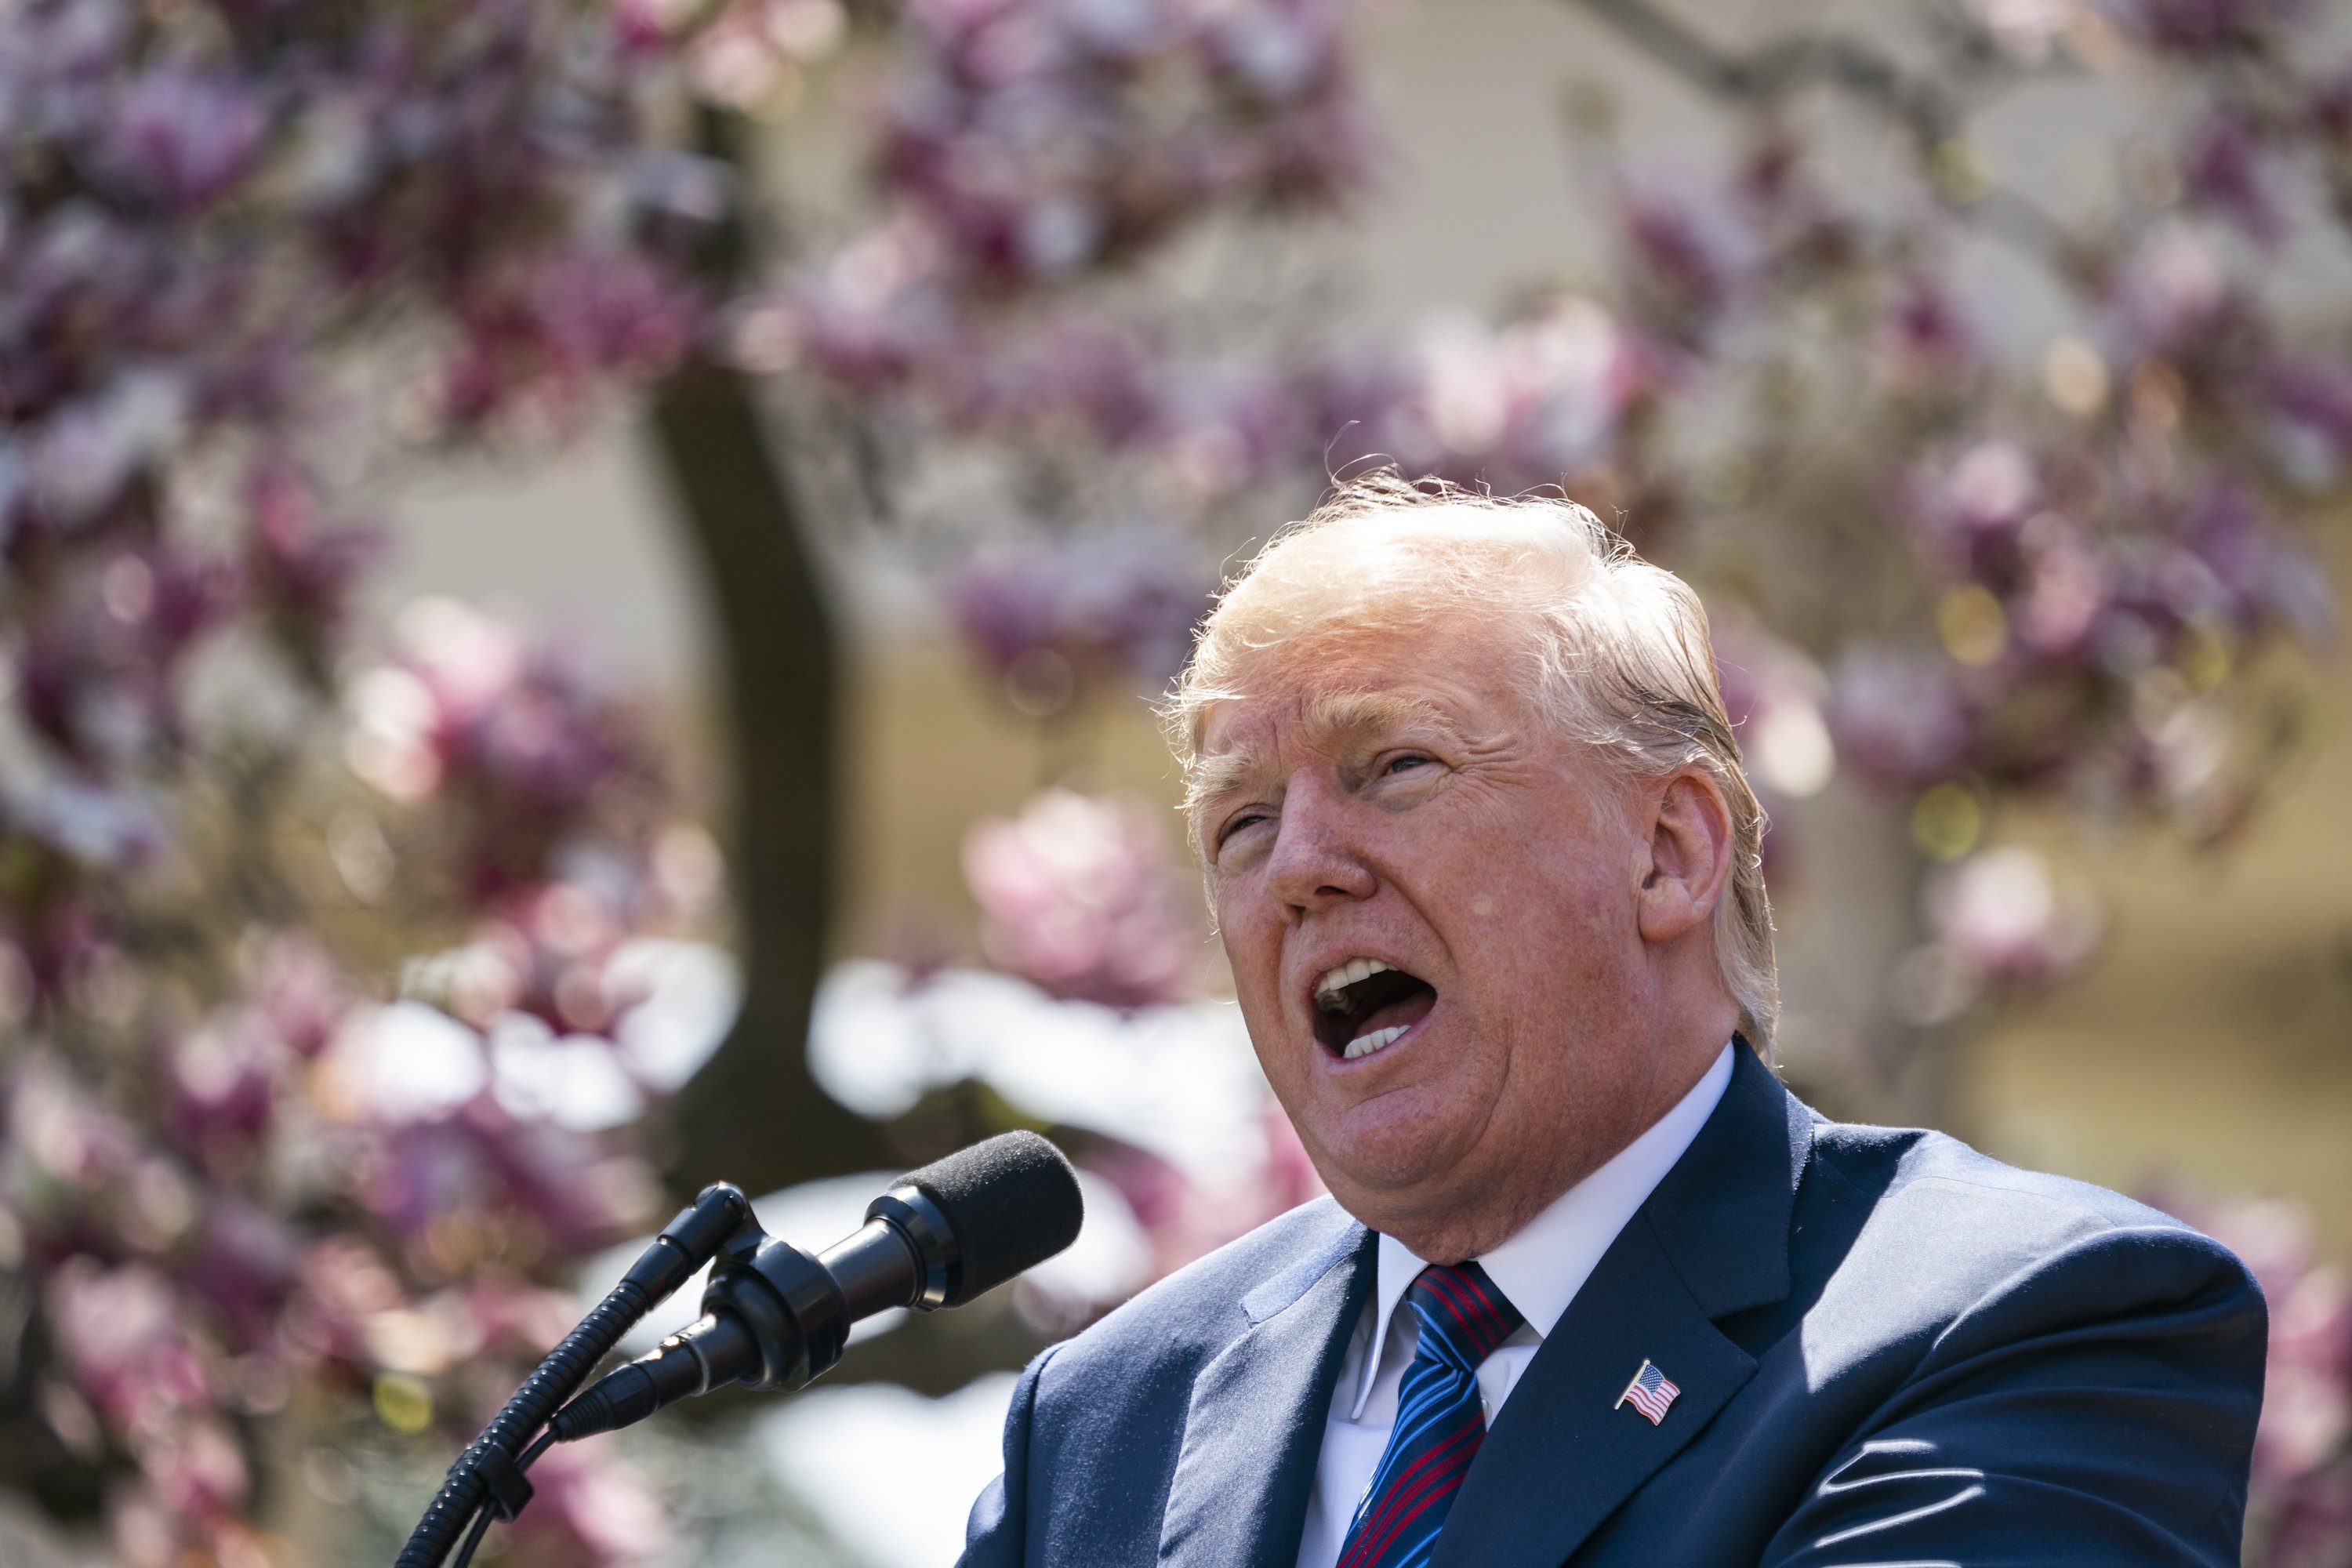 epa06664913 US President Donald J. Trump speaks about his tax cuts in the Rose Garden of the White House in Washington DC, USA, 12 April 2018. Earlier in the day, President Trump once again taunted Russia in a tweet, saying an attack on Syrian 'could be very soon or not so soon at all' in response to Syria's reported chemical weapons attack against a rebel-held town in Eastern Ghouta.  EPA/JIM LO SCALZO